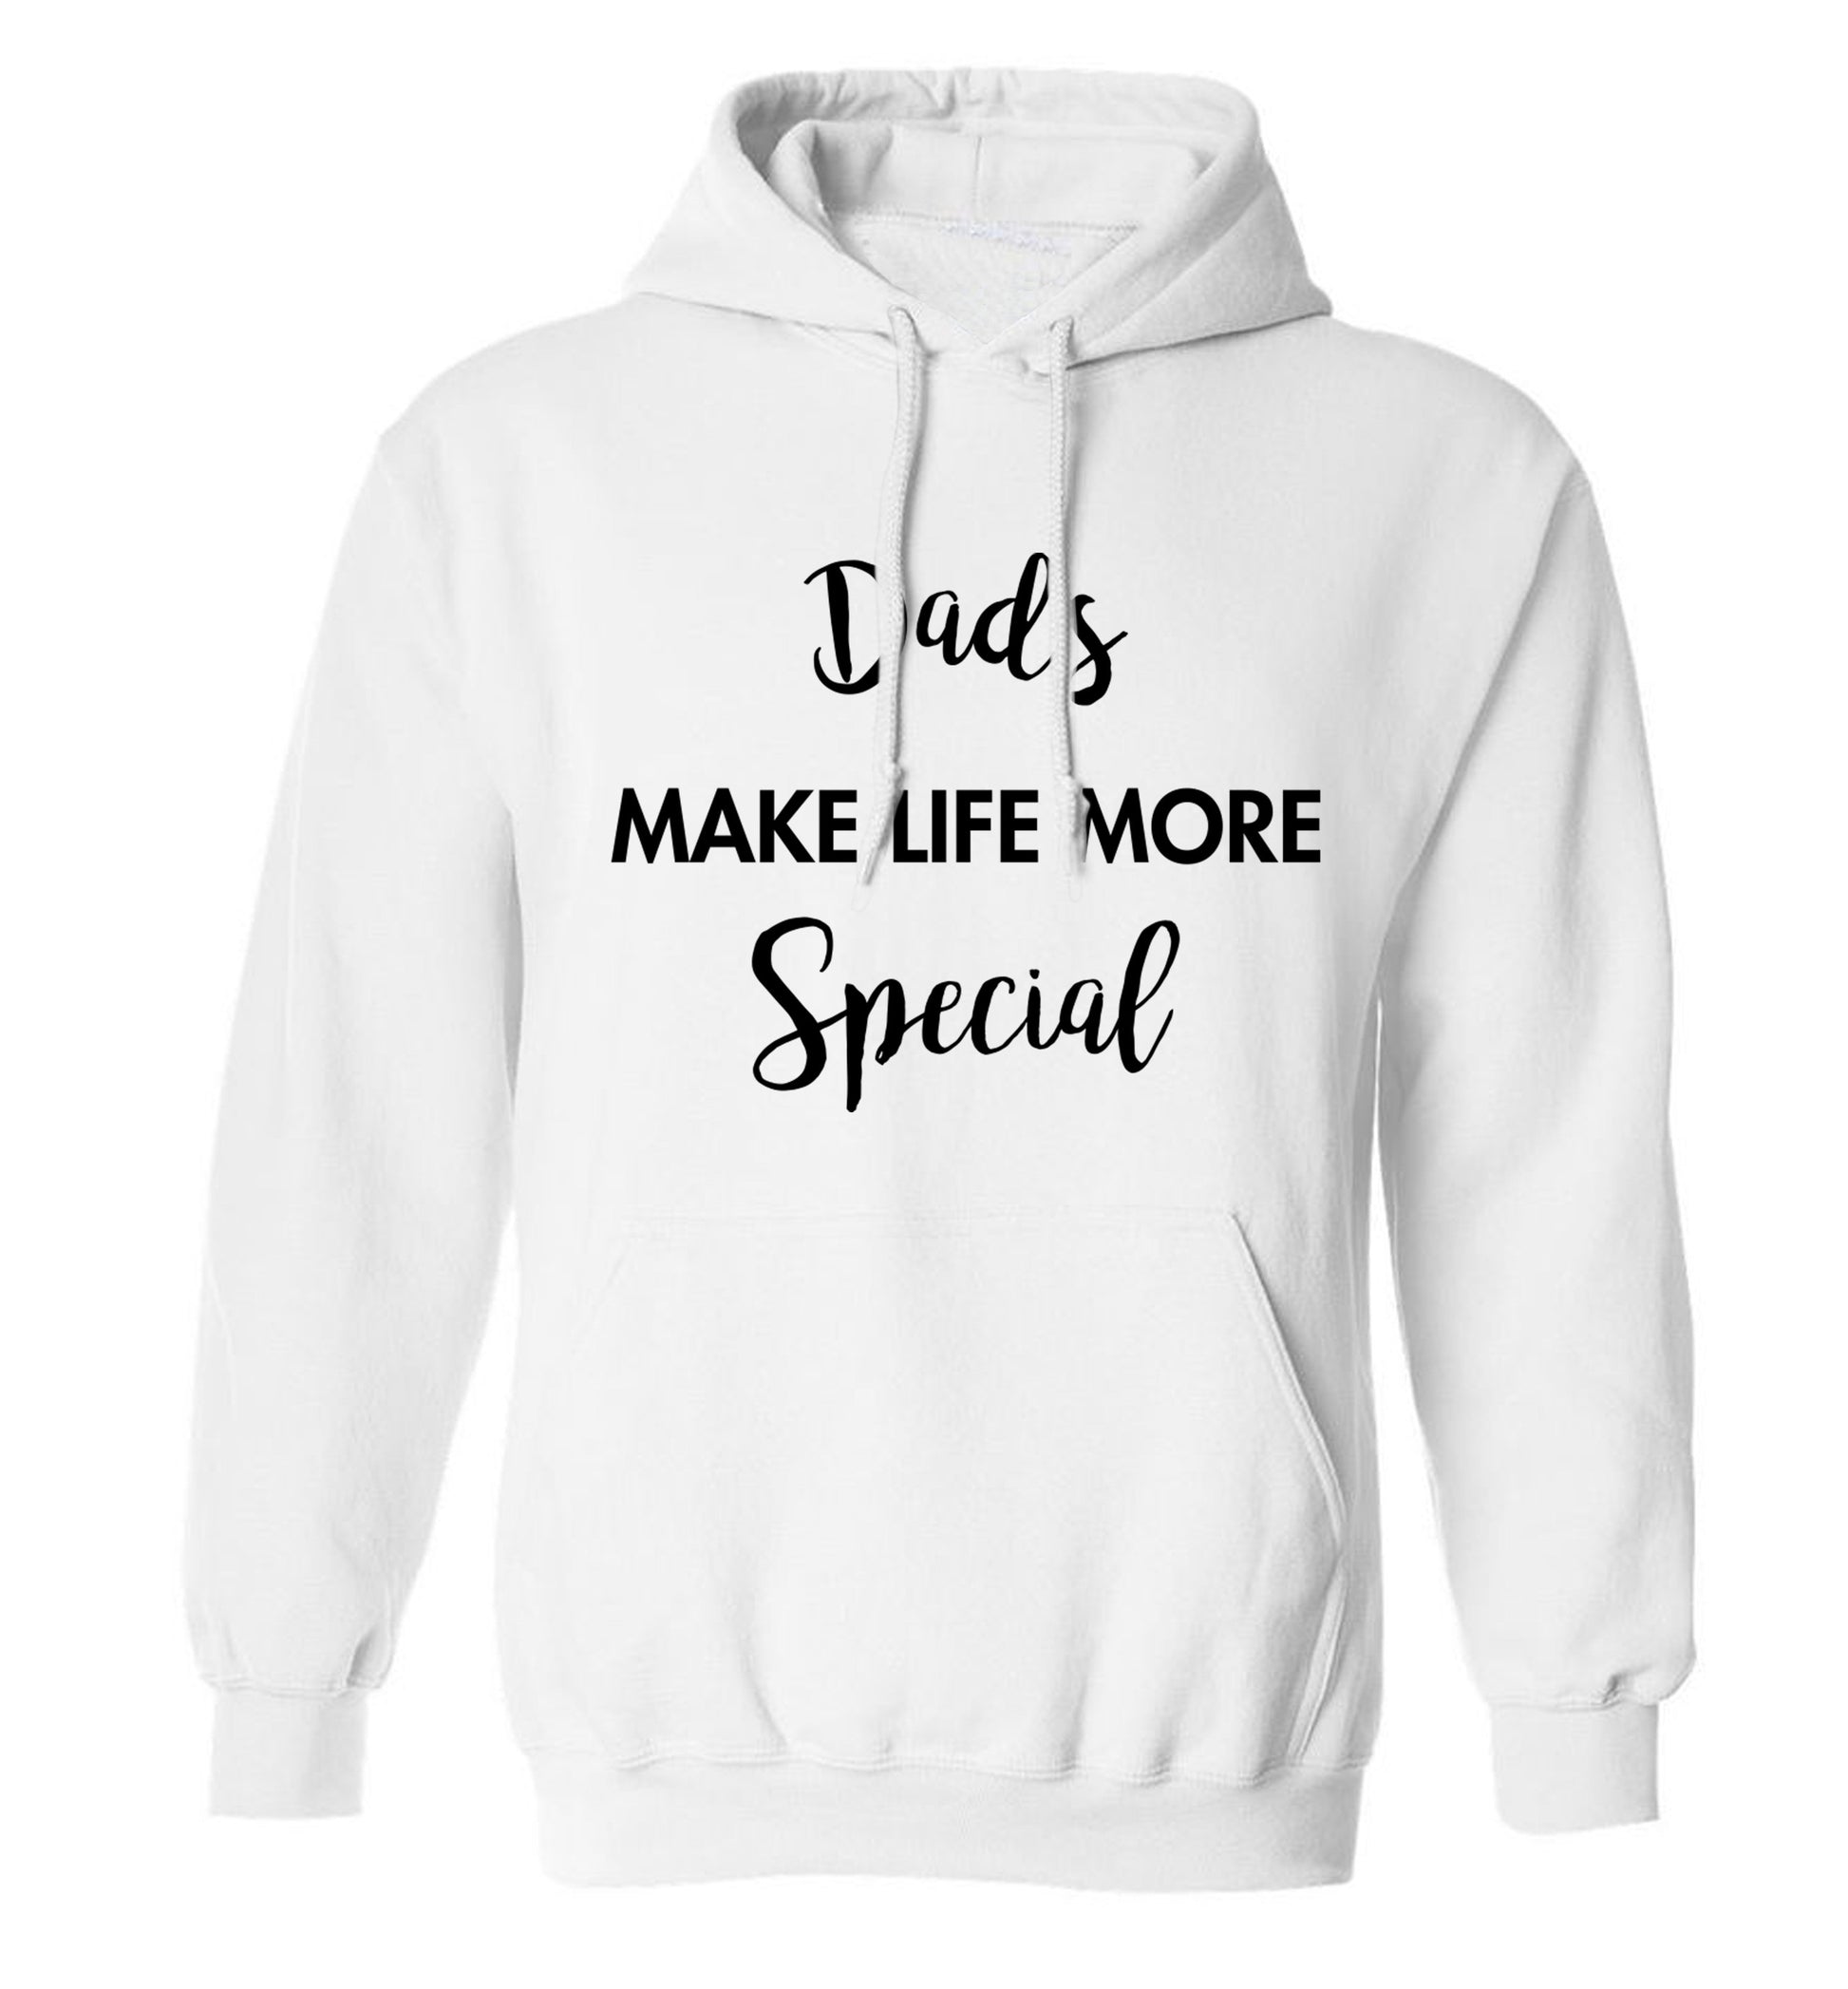 Dads make life more special adults unisex white hoodie 2XL